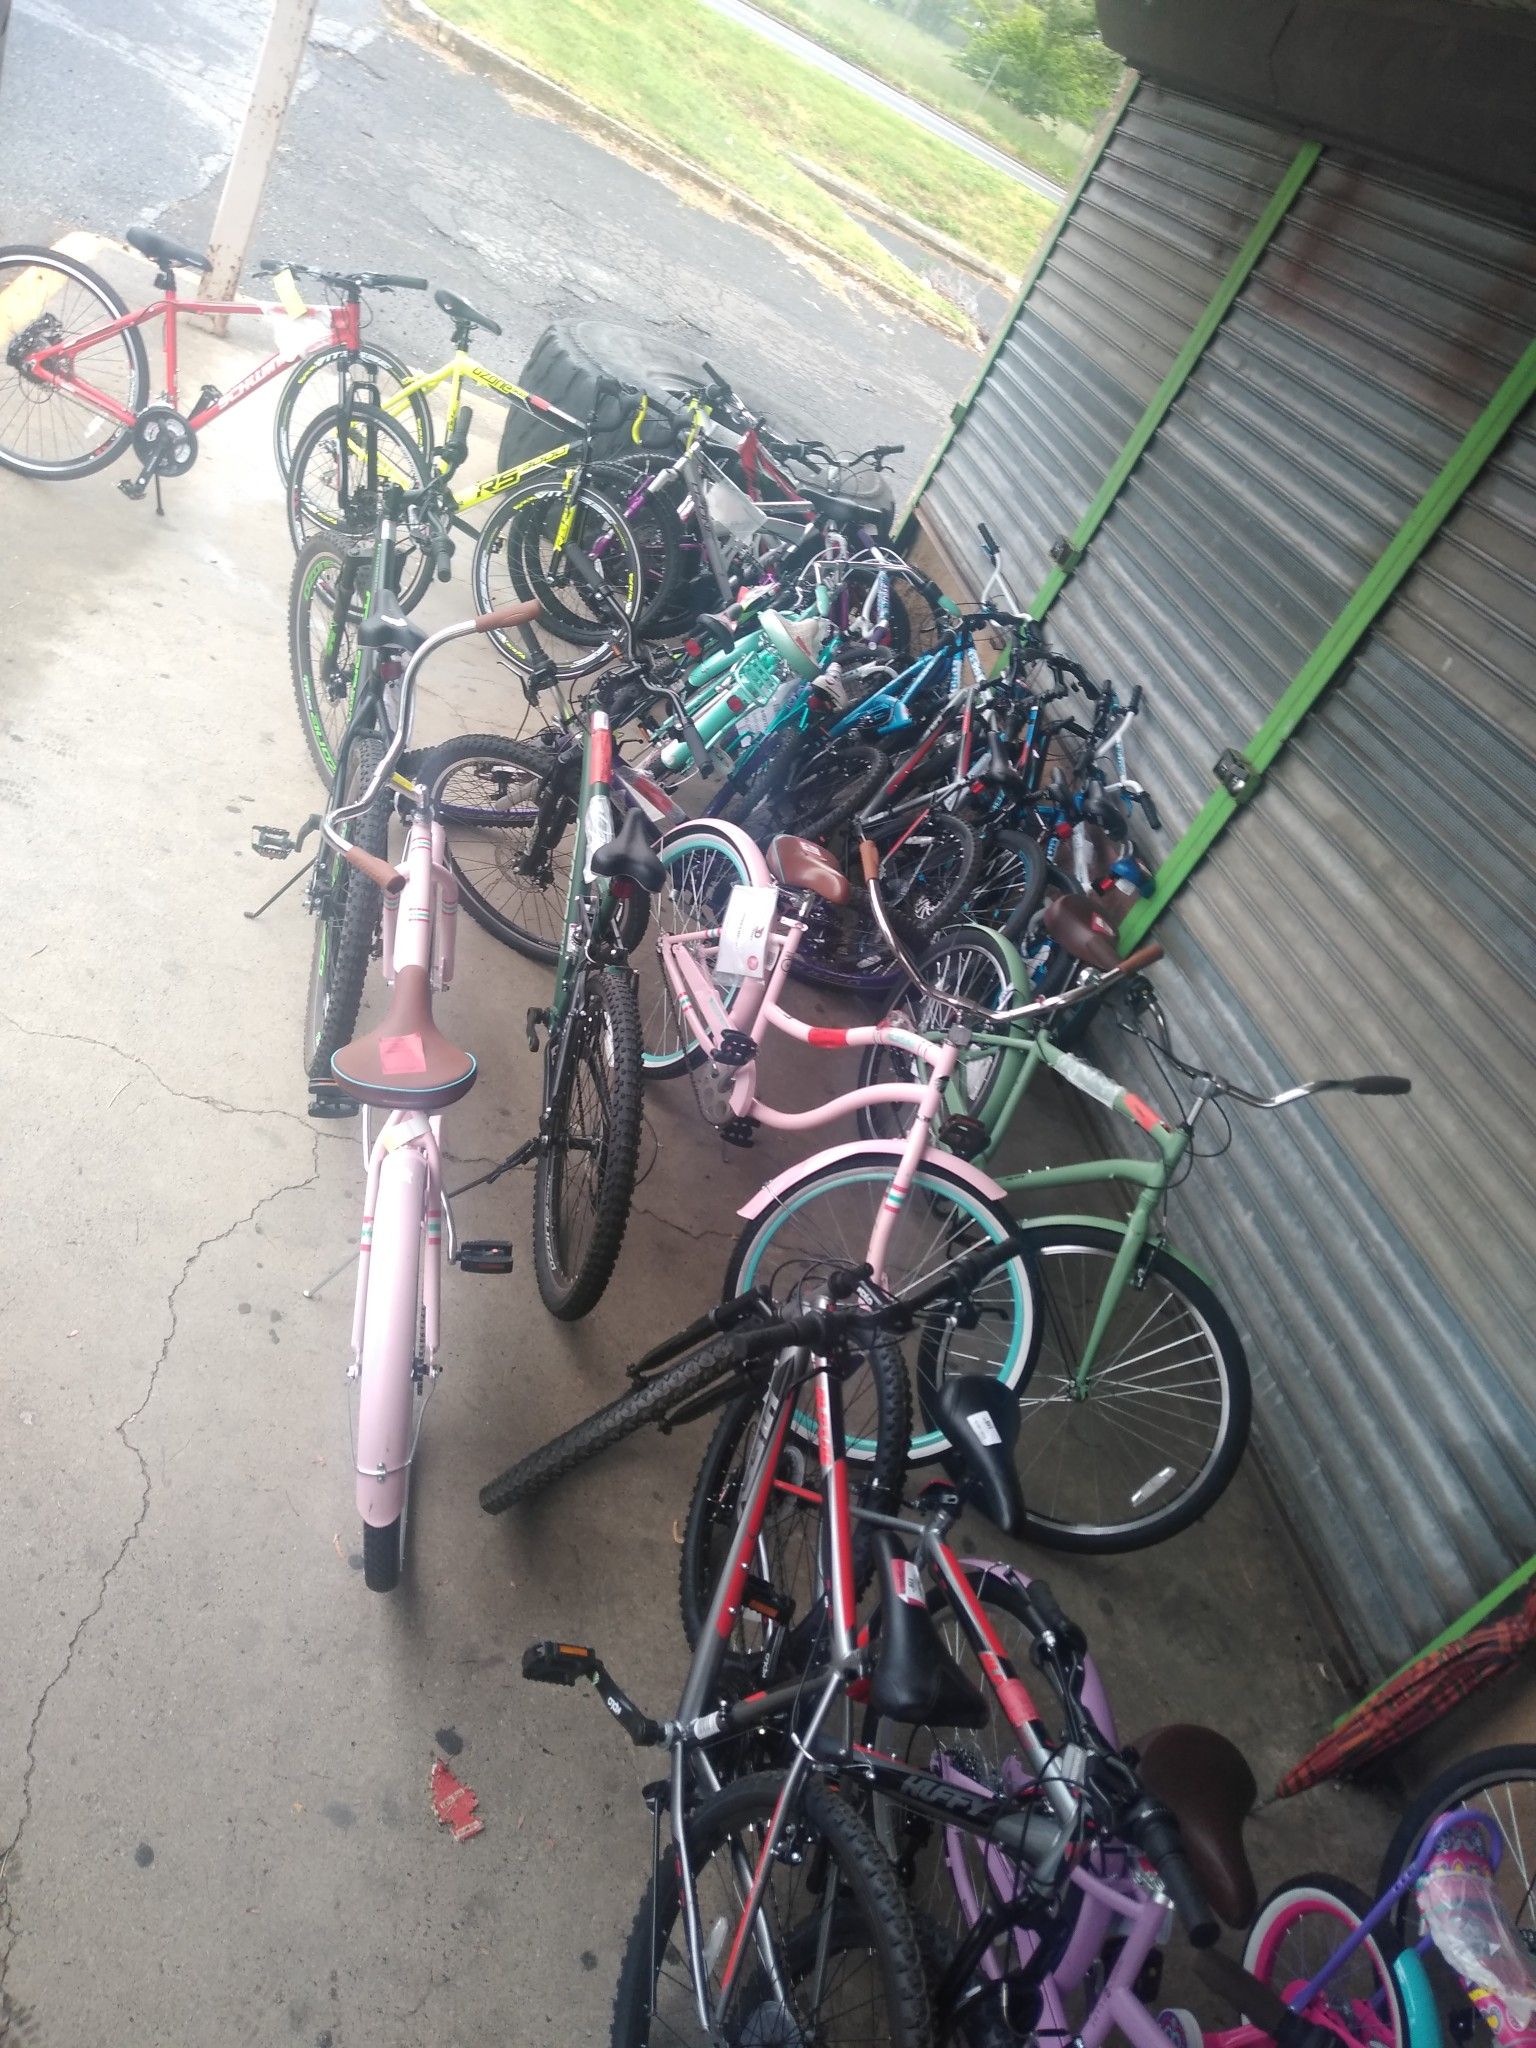 Received a bunch of bikes today will be making appointments kids and adult bikes